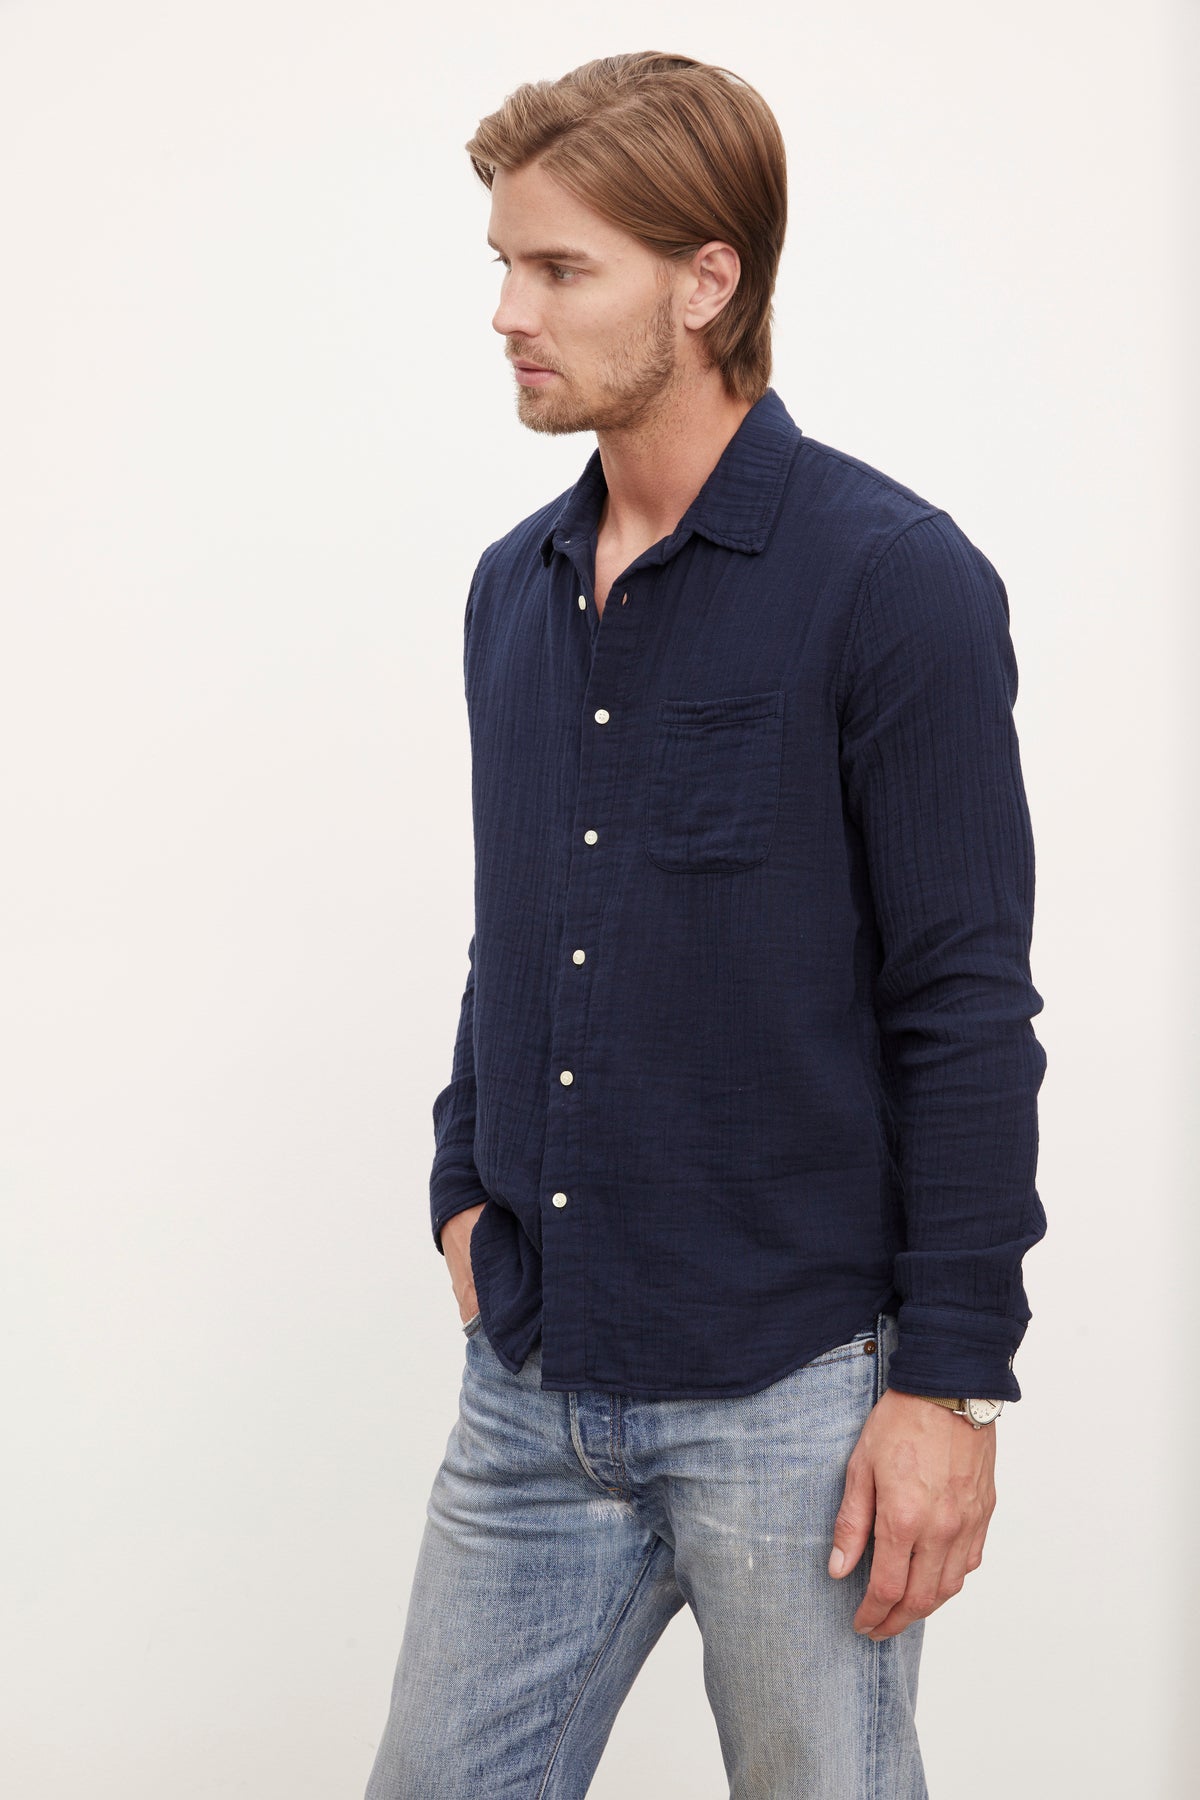 A casual man wearing jeans and the ELTON BUTTON-UP SHIRT by Velvet by Graham & Spencer.-36009394929857